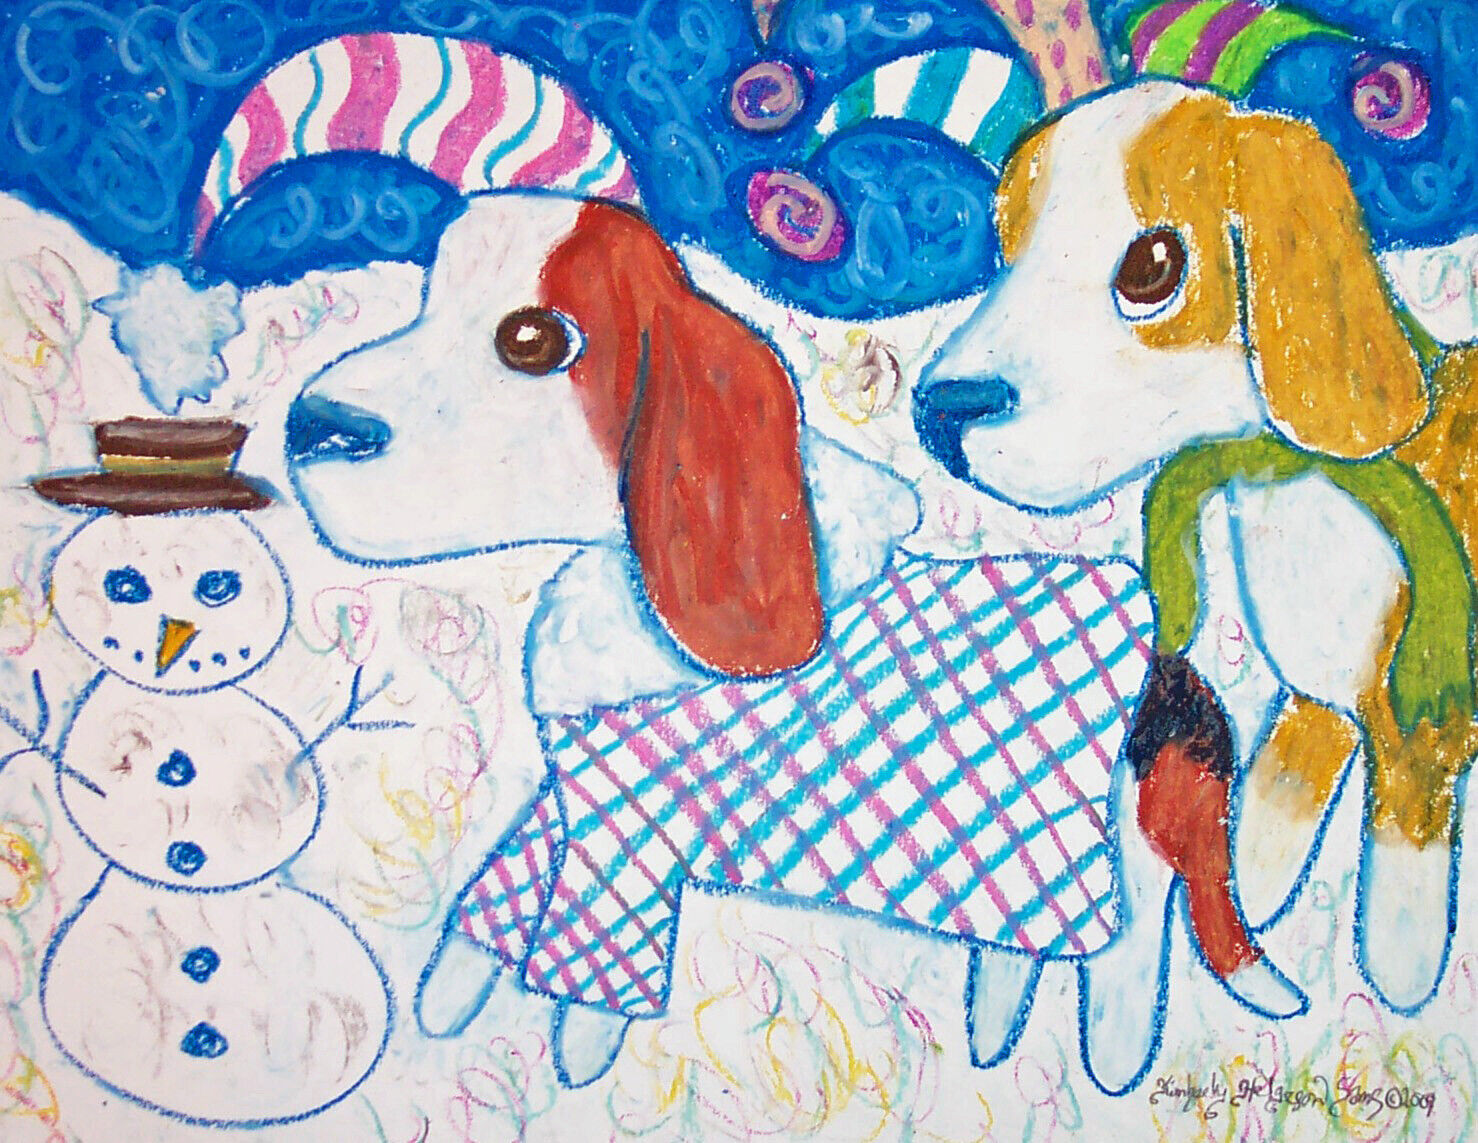 Beagle in the Snow Folk Art Print 8.5 x 11 Dog Collectible Snowman Winter Signed